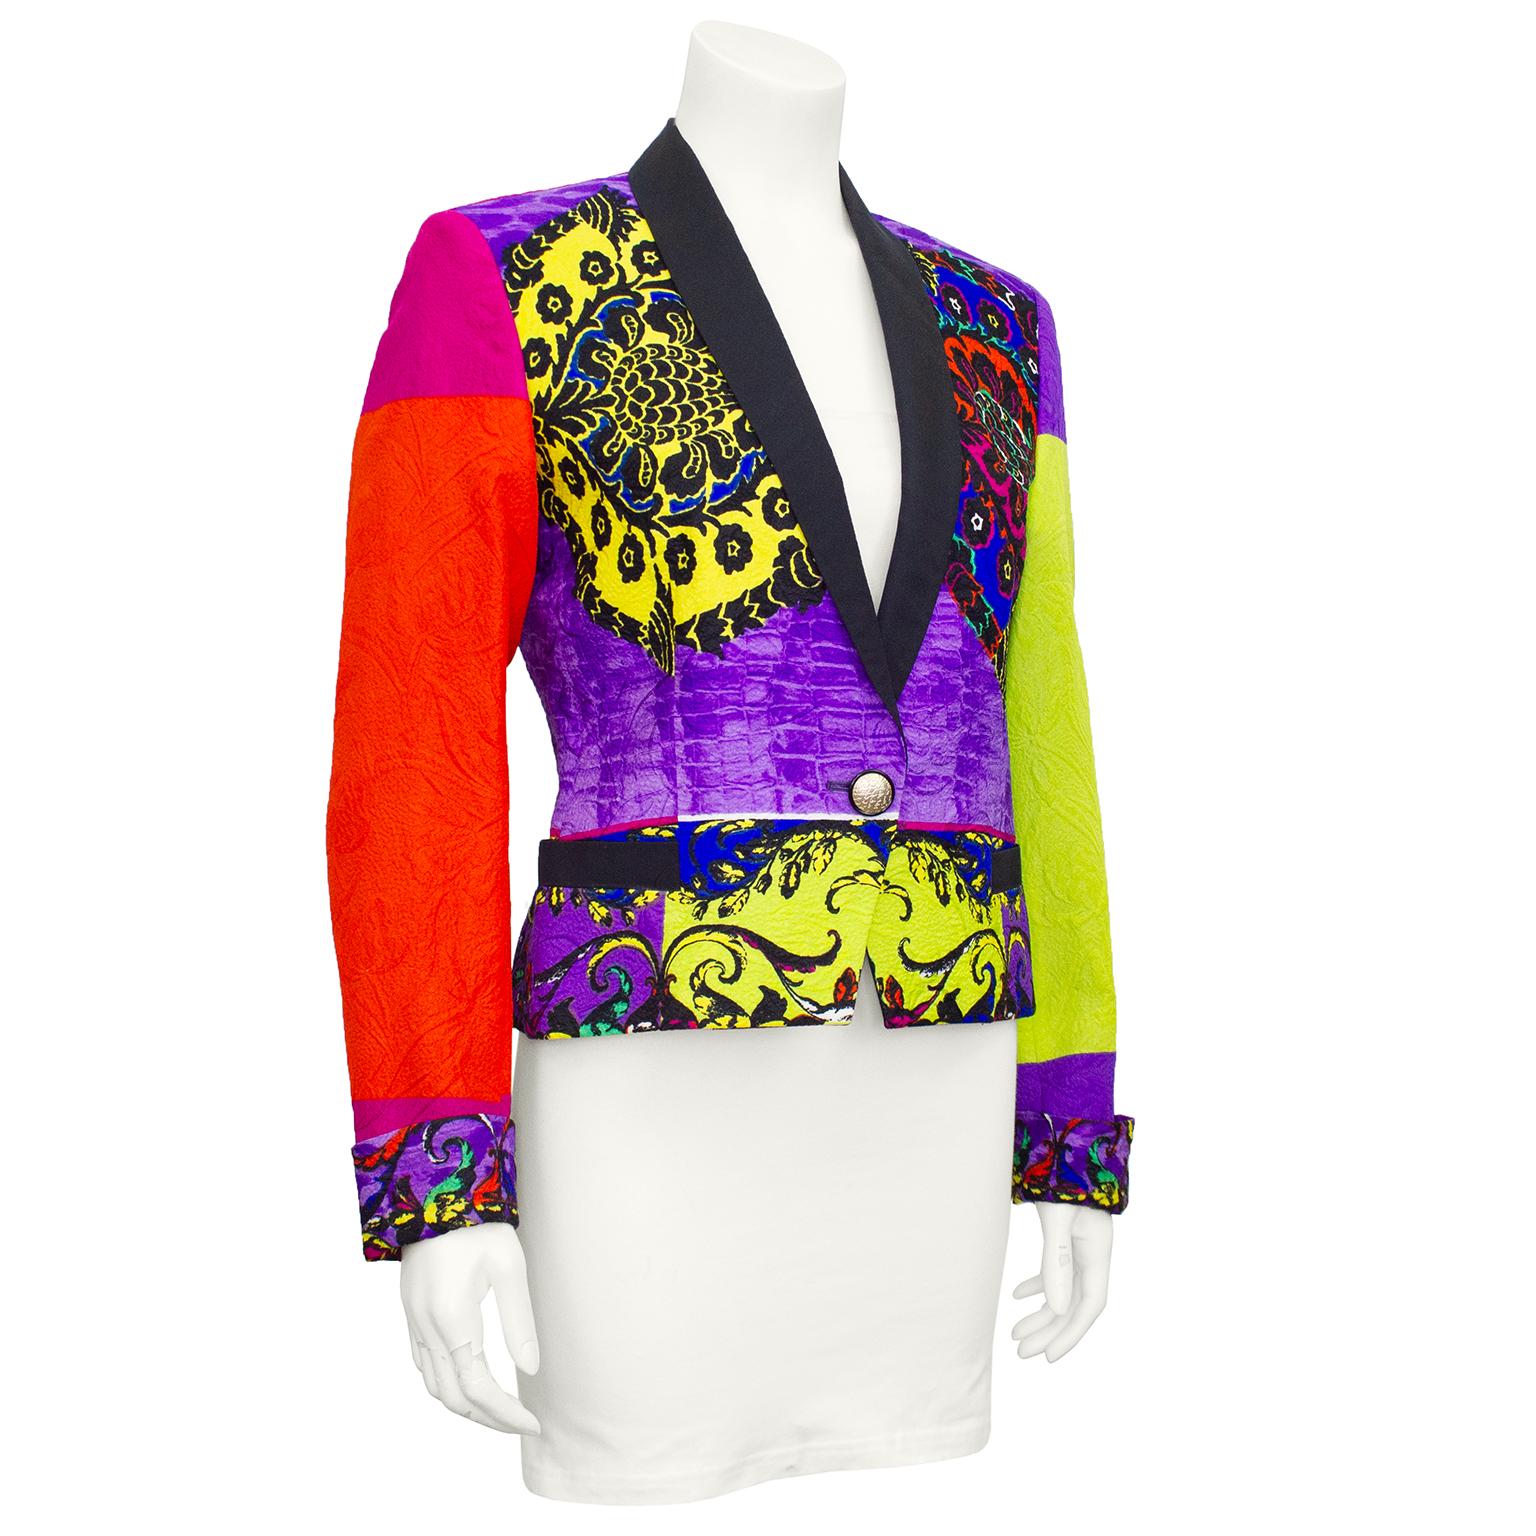 Colourful tuxedo style jacket from Gianni Versace's early 1990's collections. Lime green, purple, yellow, pink and orange colour block brocade with classic Versace Baroque print throughout. Subtle metallic throughout brocade. Black satin label with